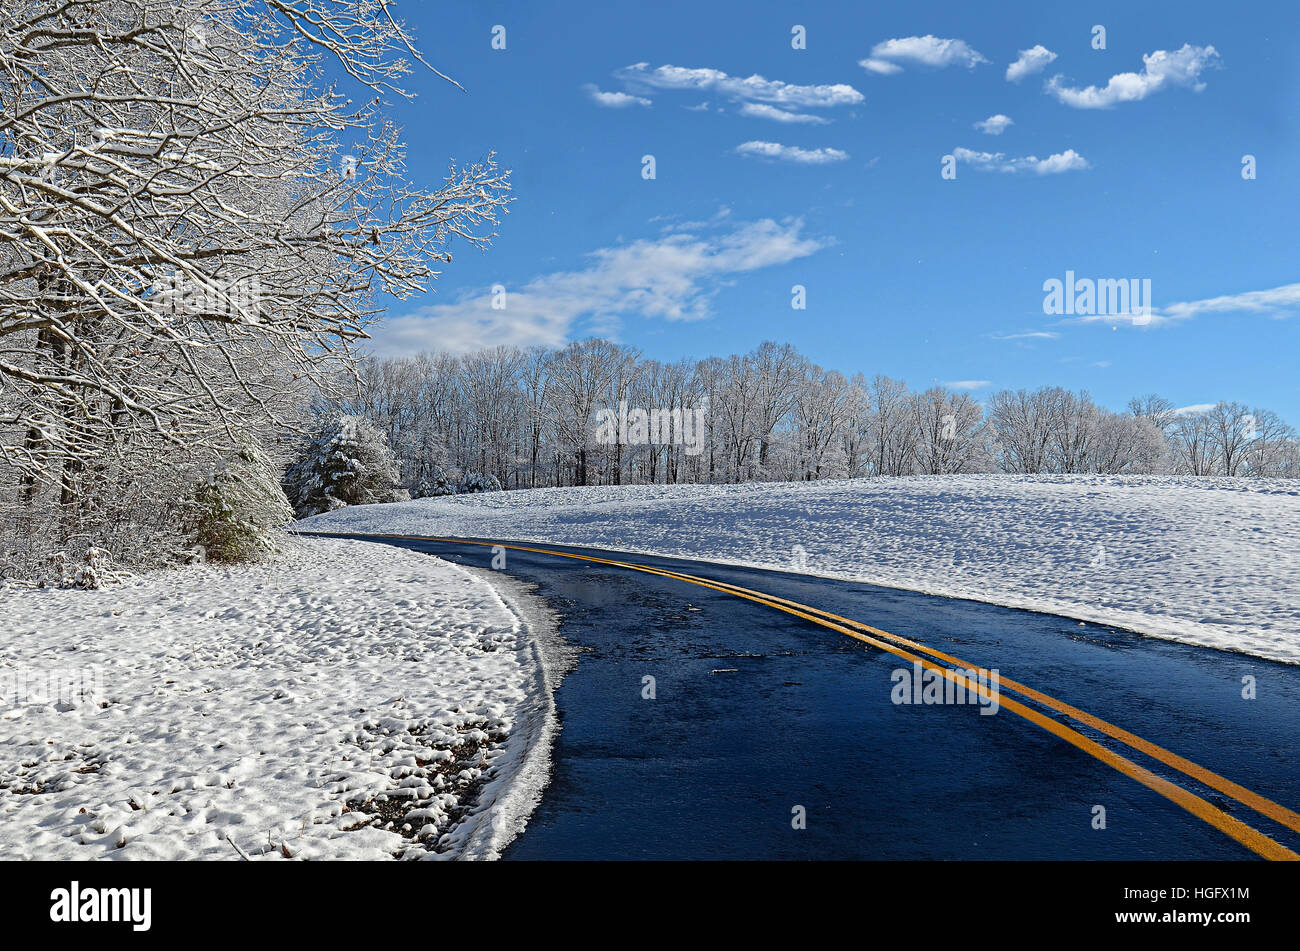 A slick curving road with winter landscape. Concept for travel, season, beauty in nature, peacefulness. Stock Photo